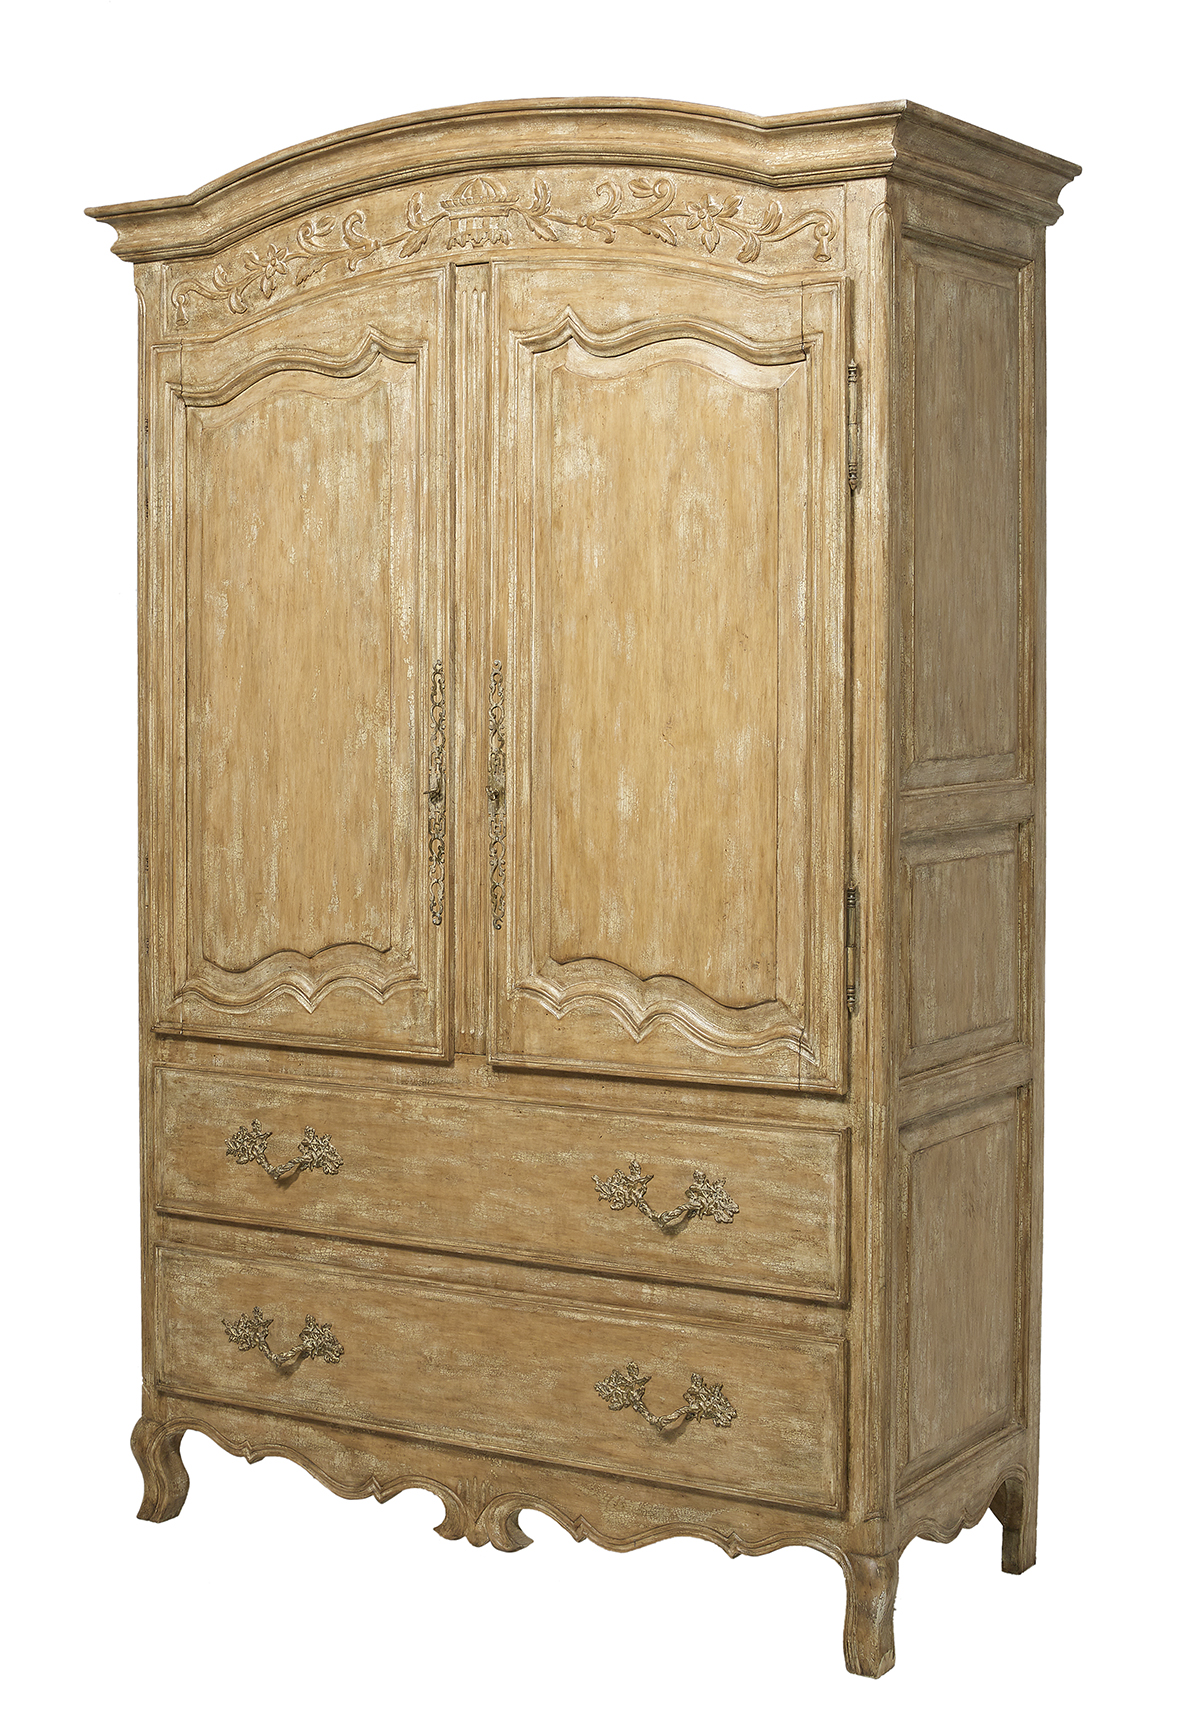 Large French Provincial-Style Polychrome Cabinet - Image 2 of 4